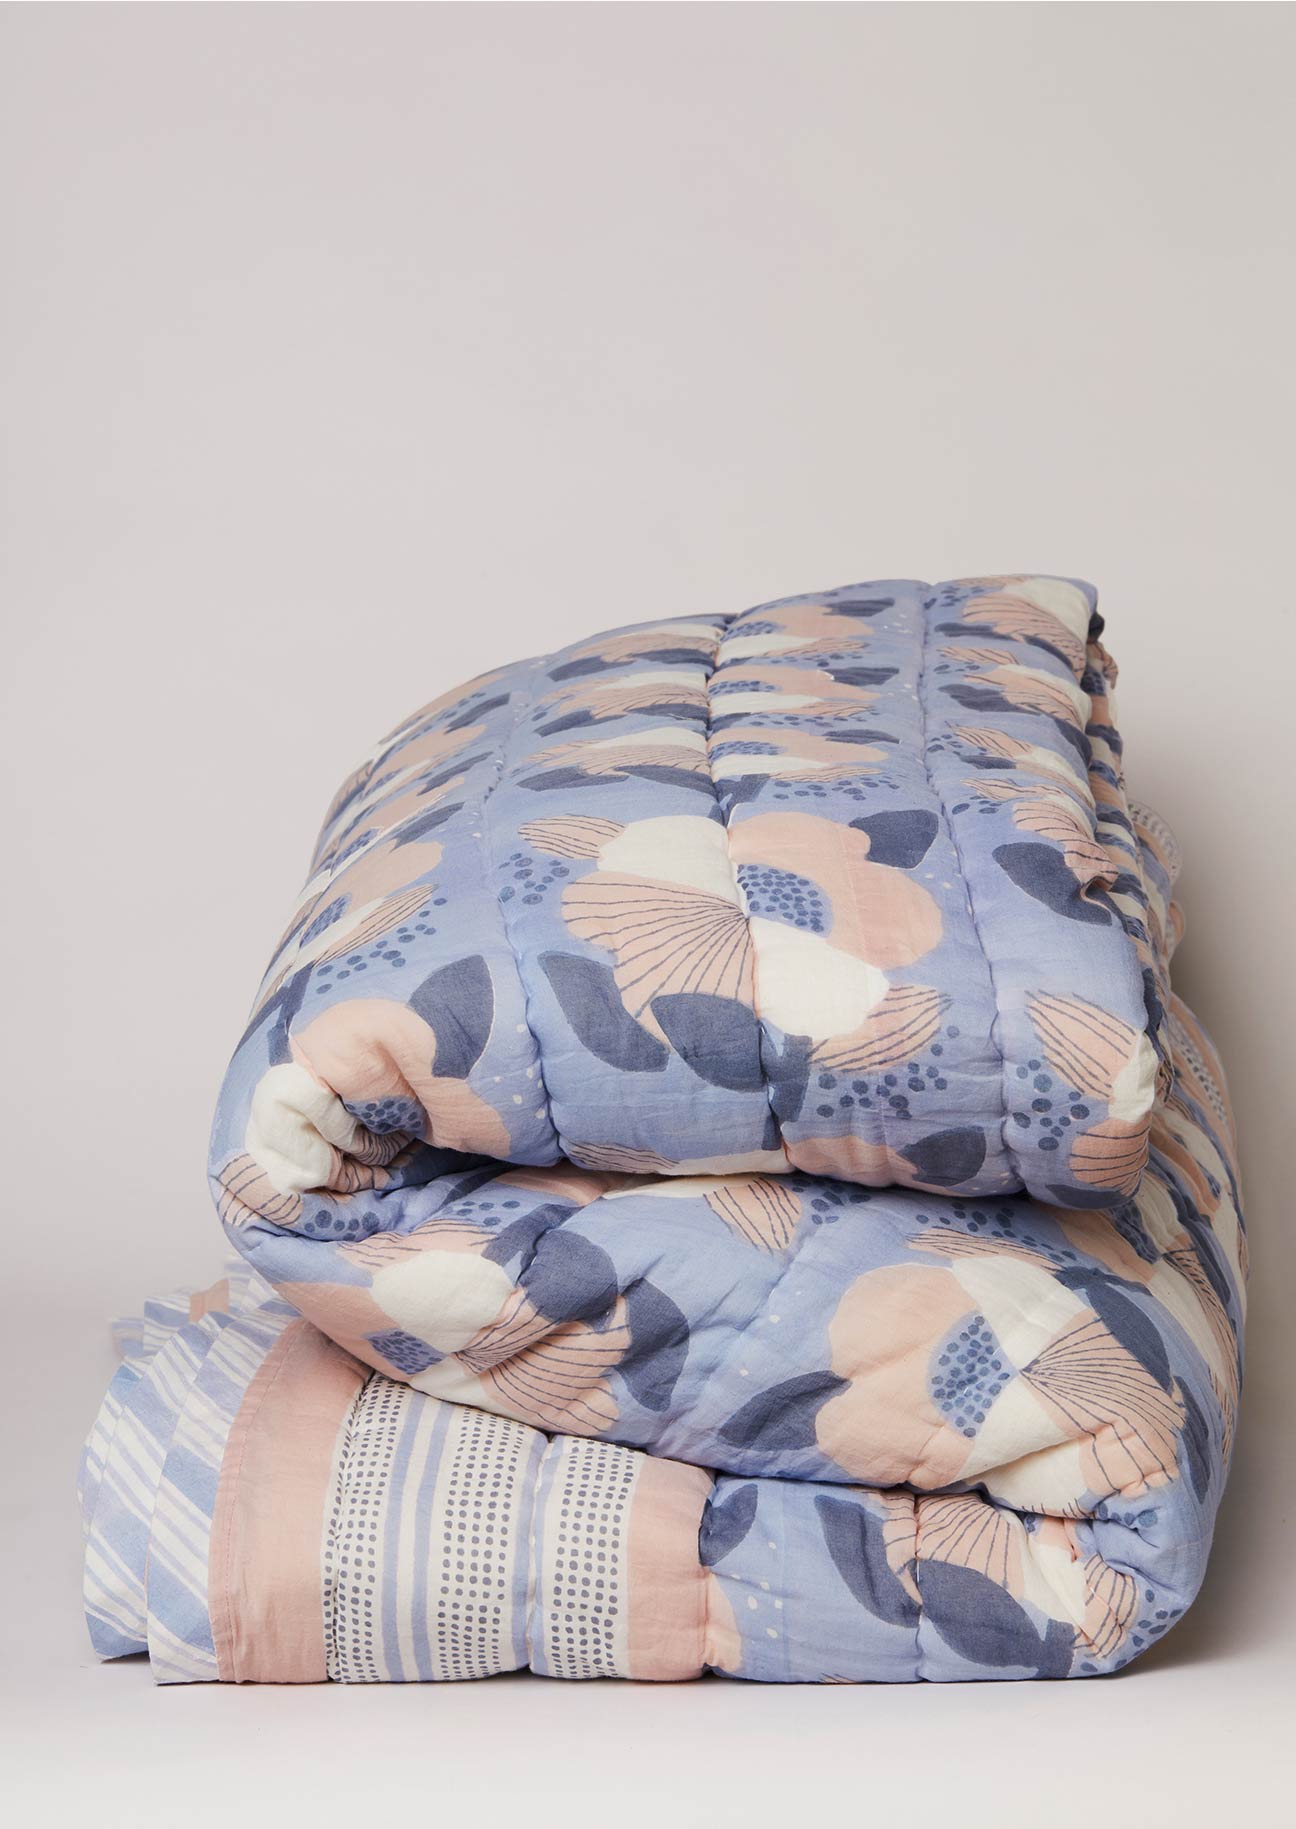 Folded block printed cotton quilt in blue and pink floral print